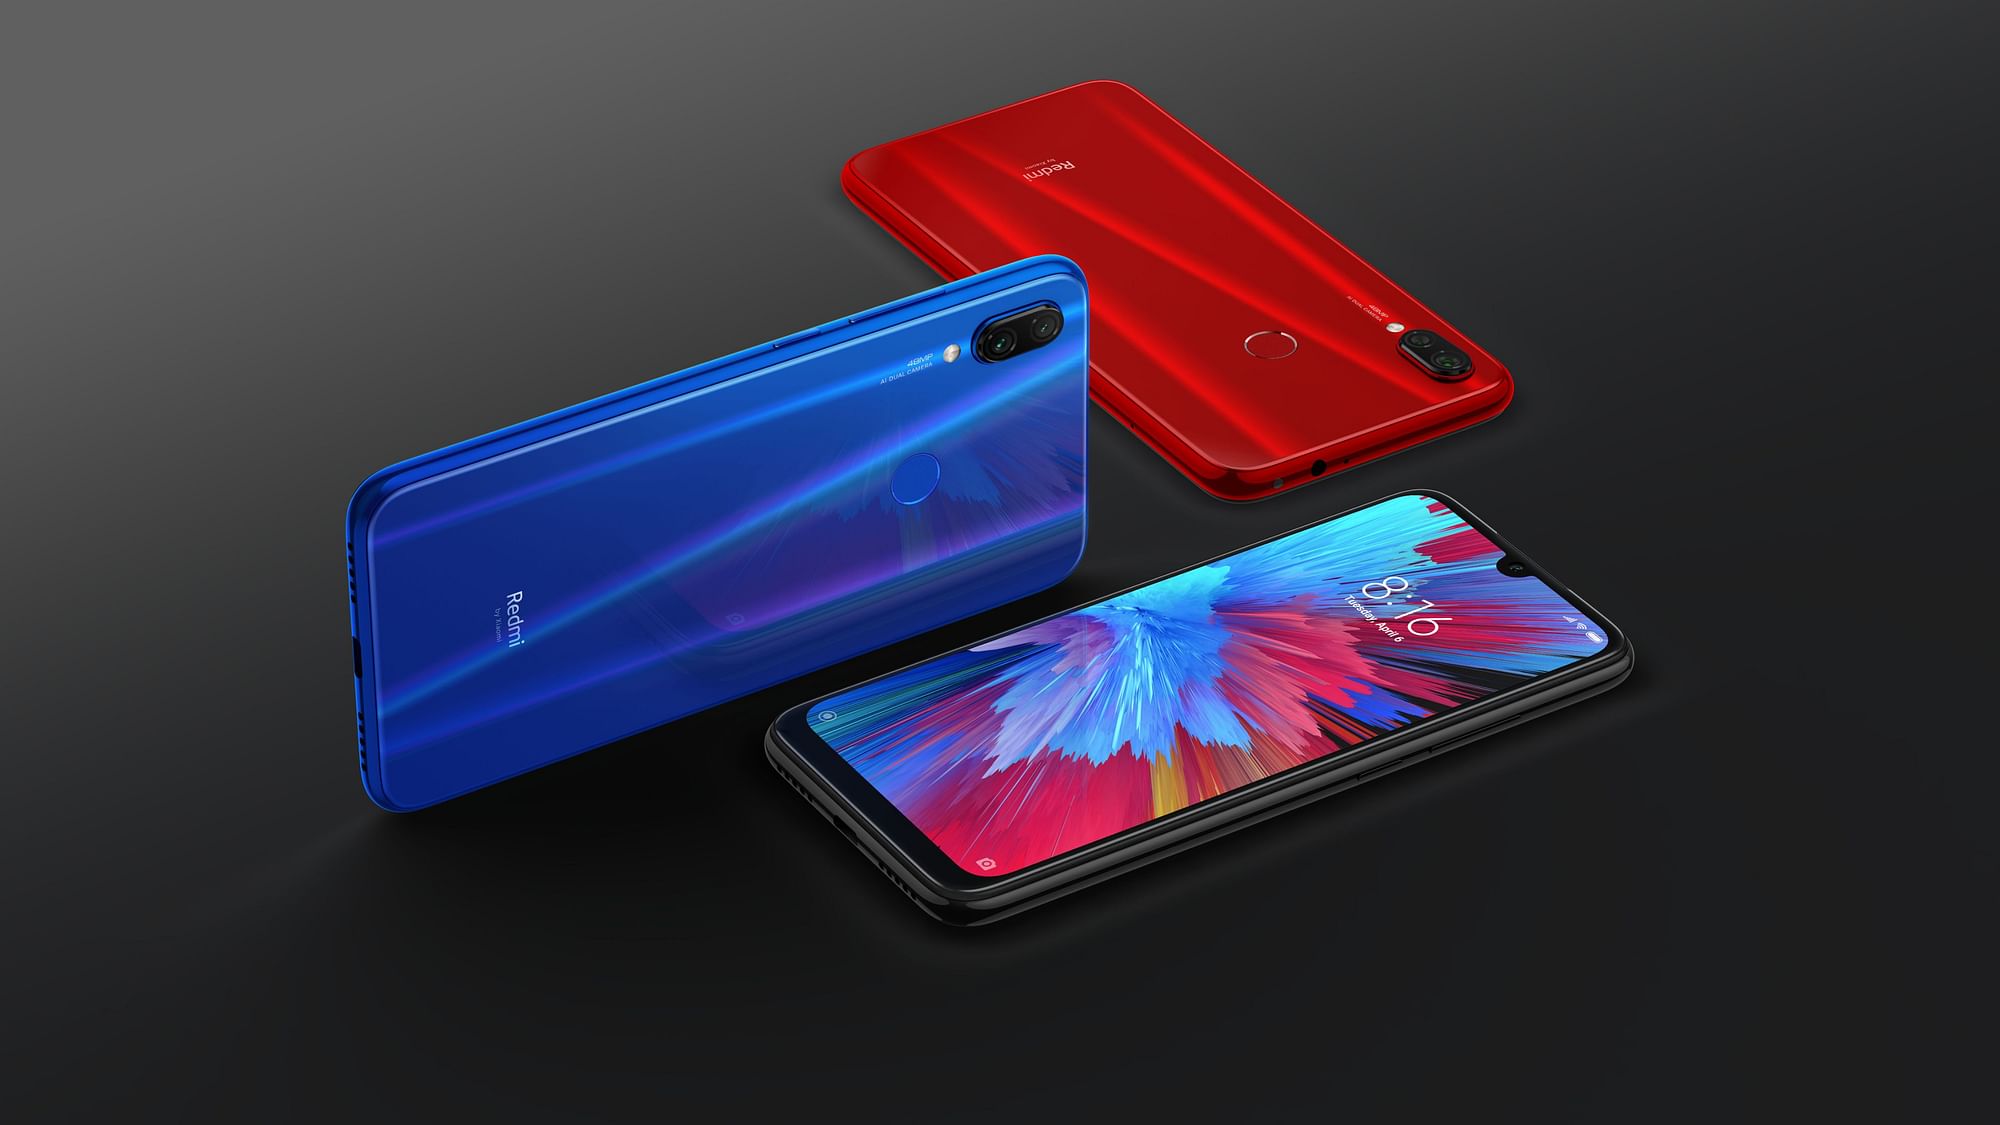 Redmi Note 7S launches in India to join other Redmi Note 7 variants.